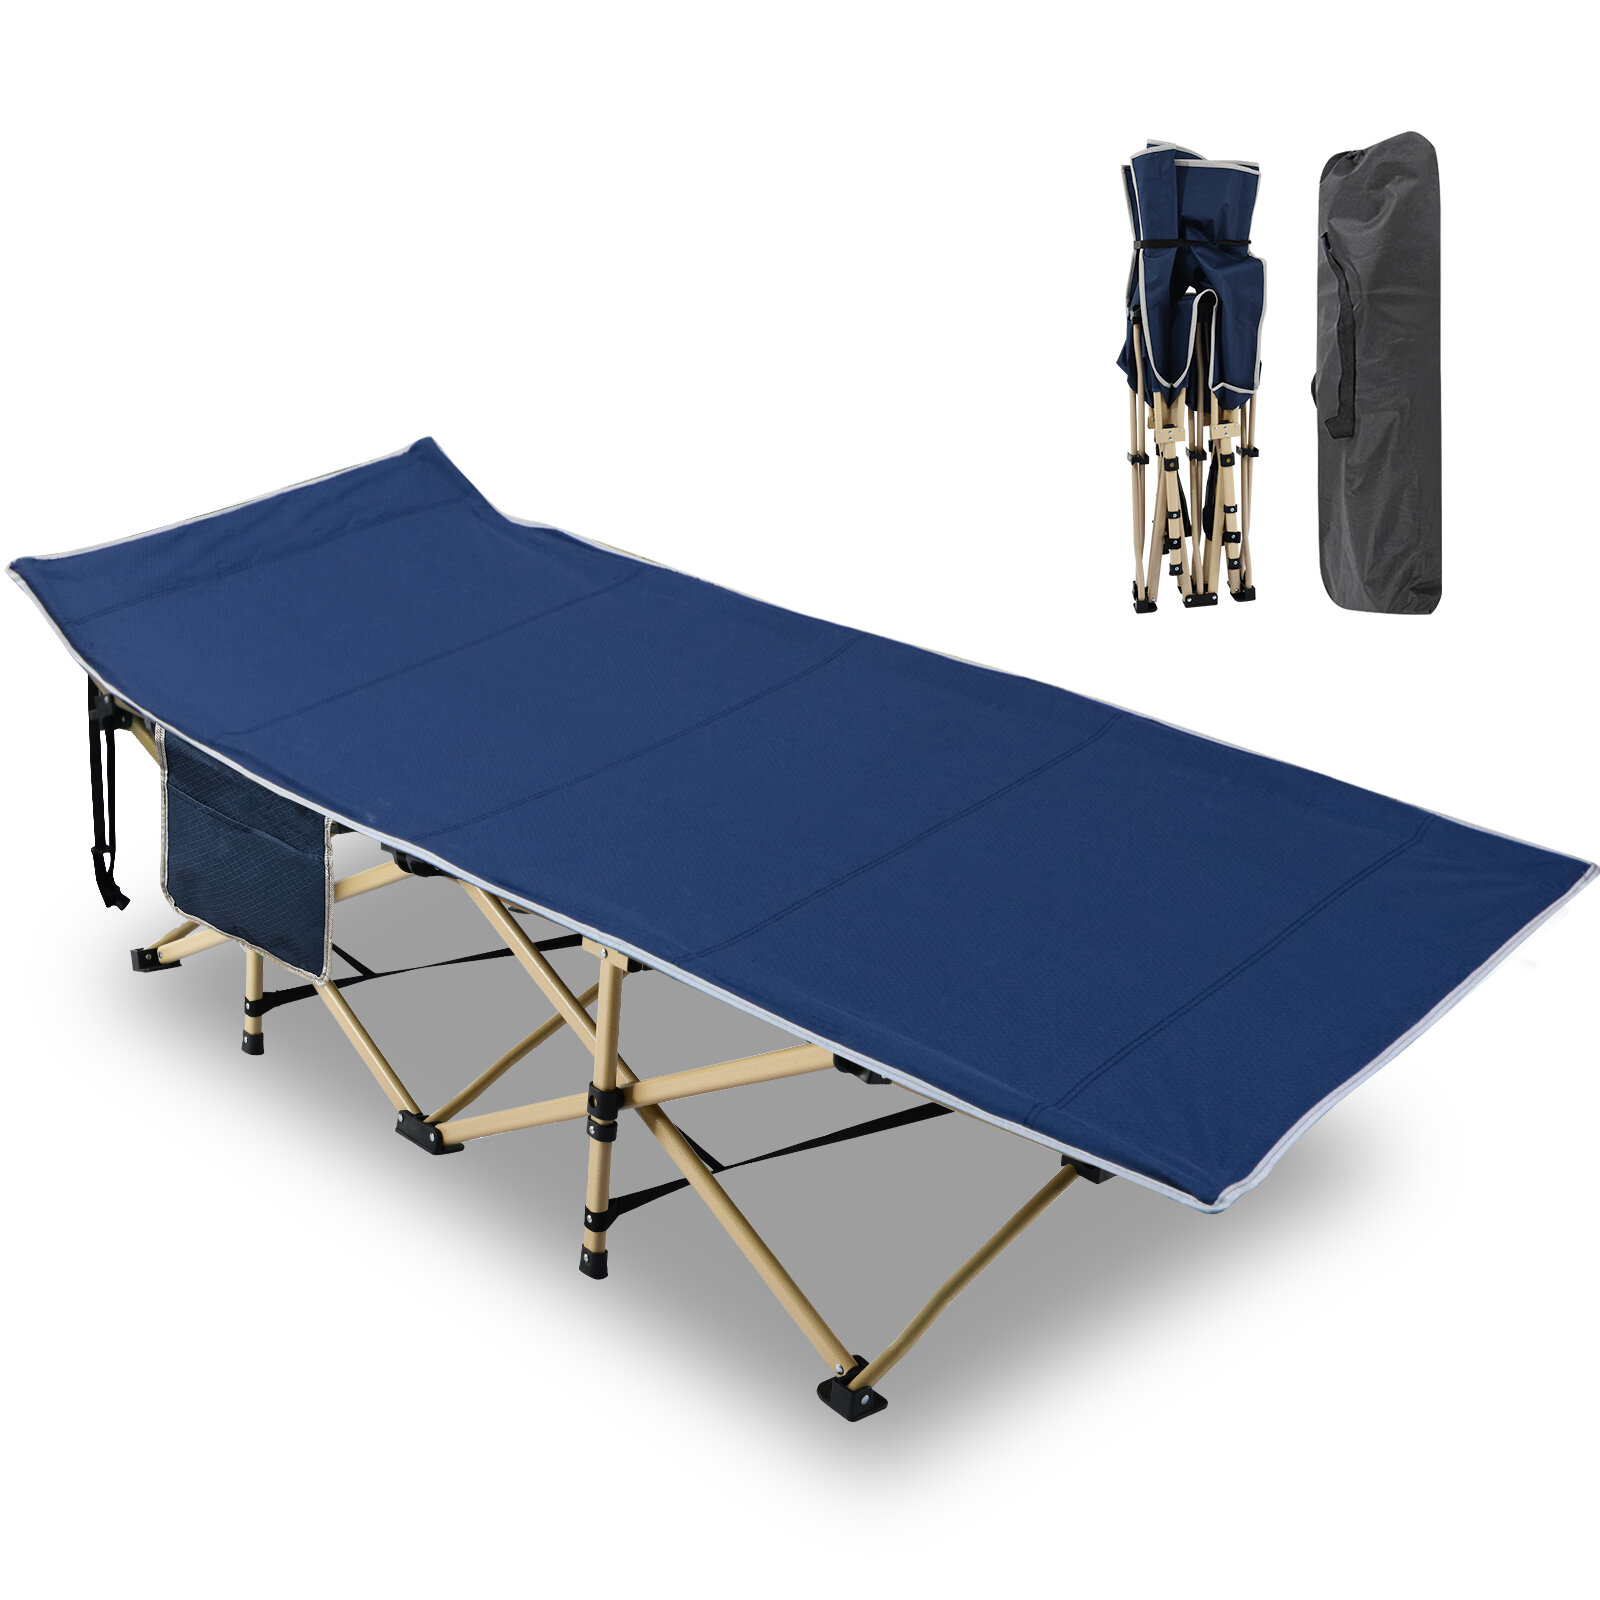 Great for Hunting Travel cots and Folding Cots Keeps Your Sleeping Pad Secure! Camping Bedding That fits Most Army cots Military cots Fitted Camping Cot Sheet for Adult Sleeping Cots 